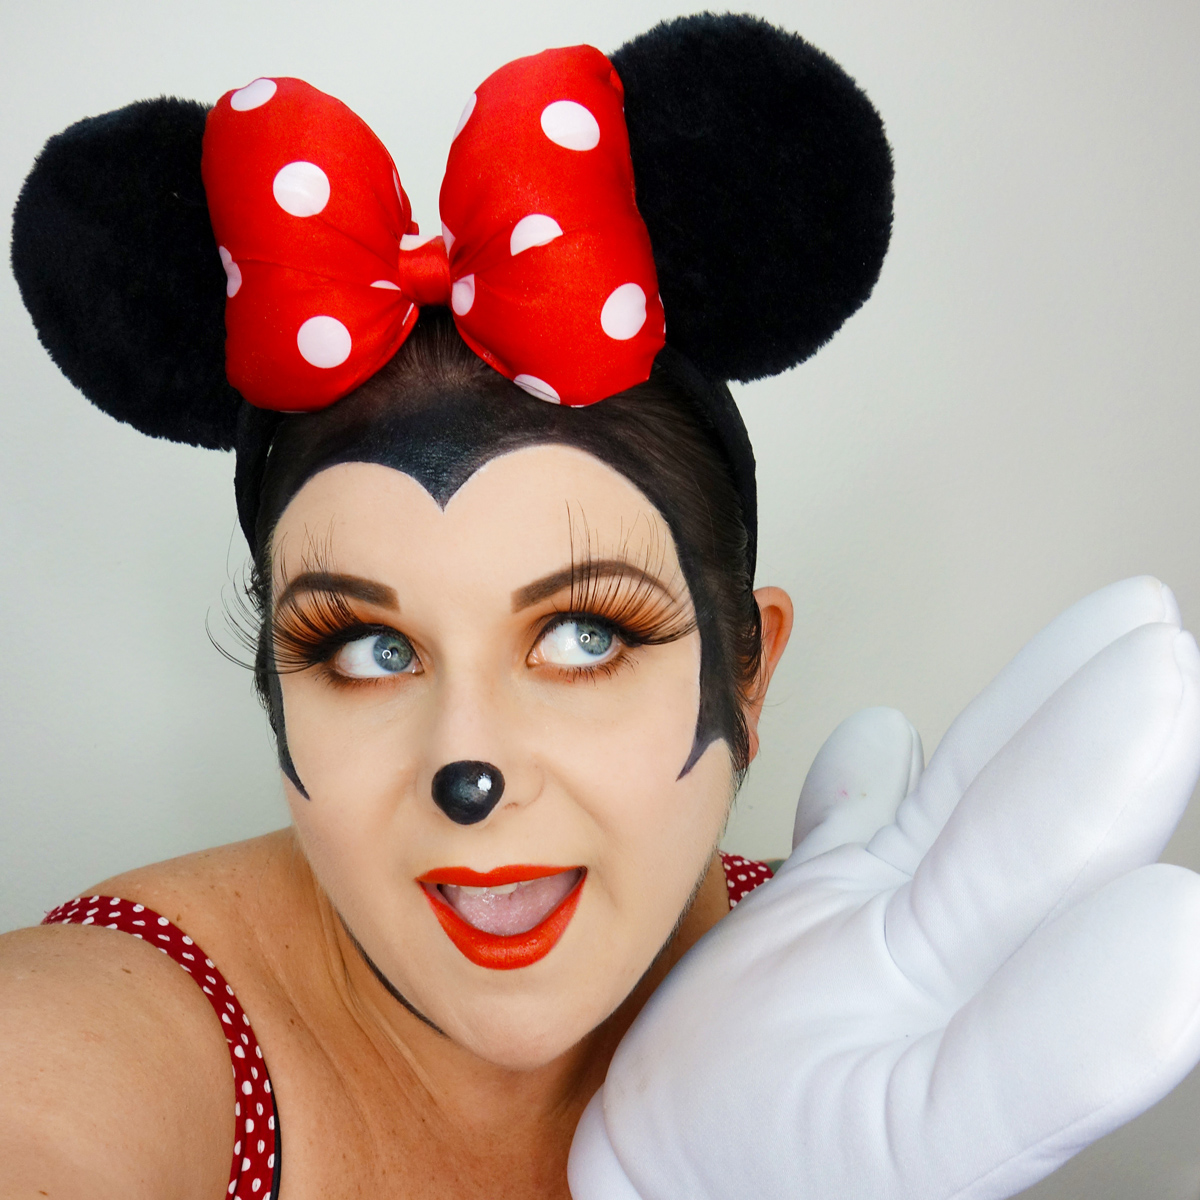 Easy Minnie Mouse Face Paint: Step-by-Step Tutorial